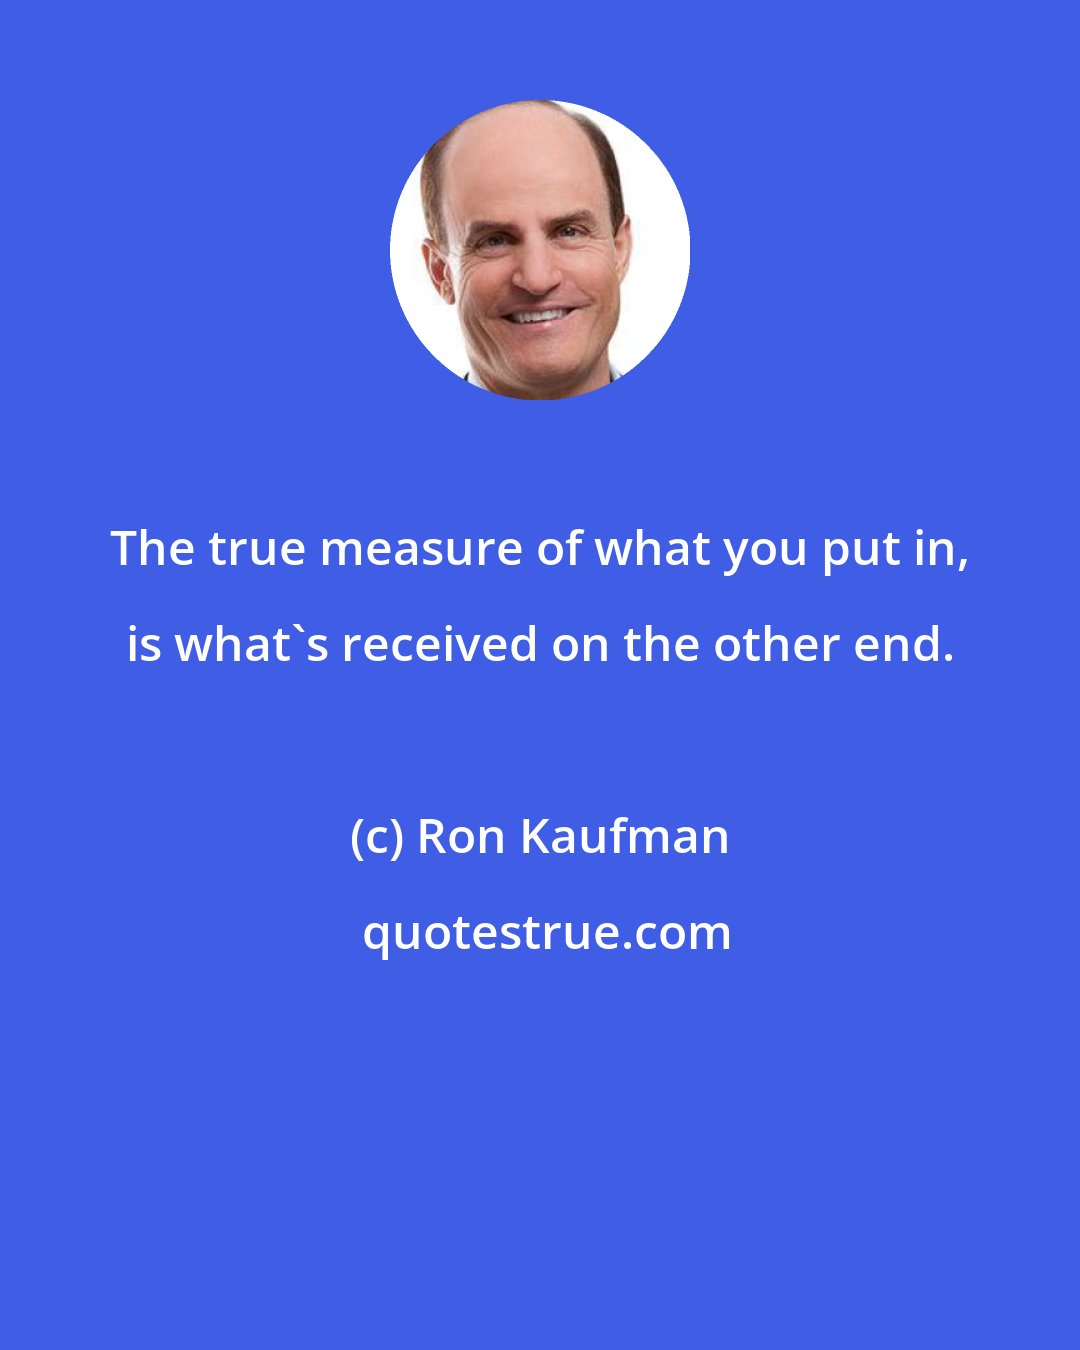 Ron Kaufman: The true measure of what you put in, is what's received on the other end.